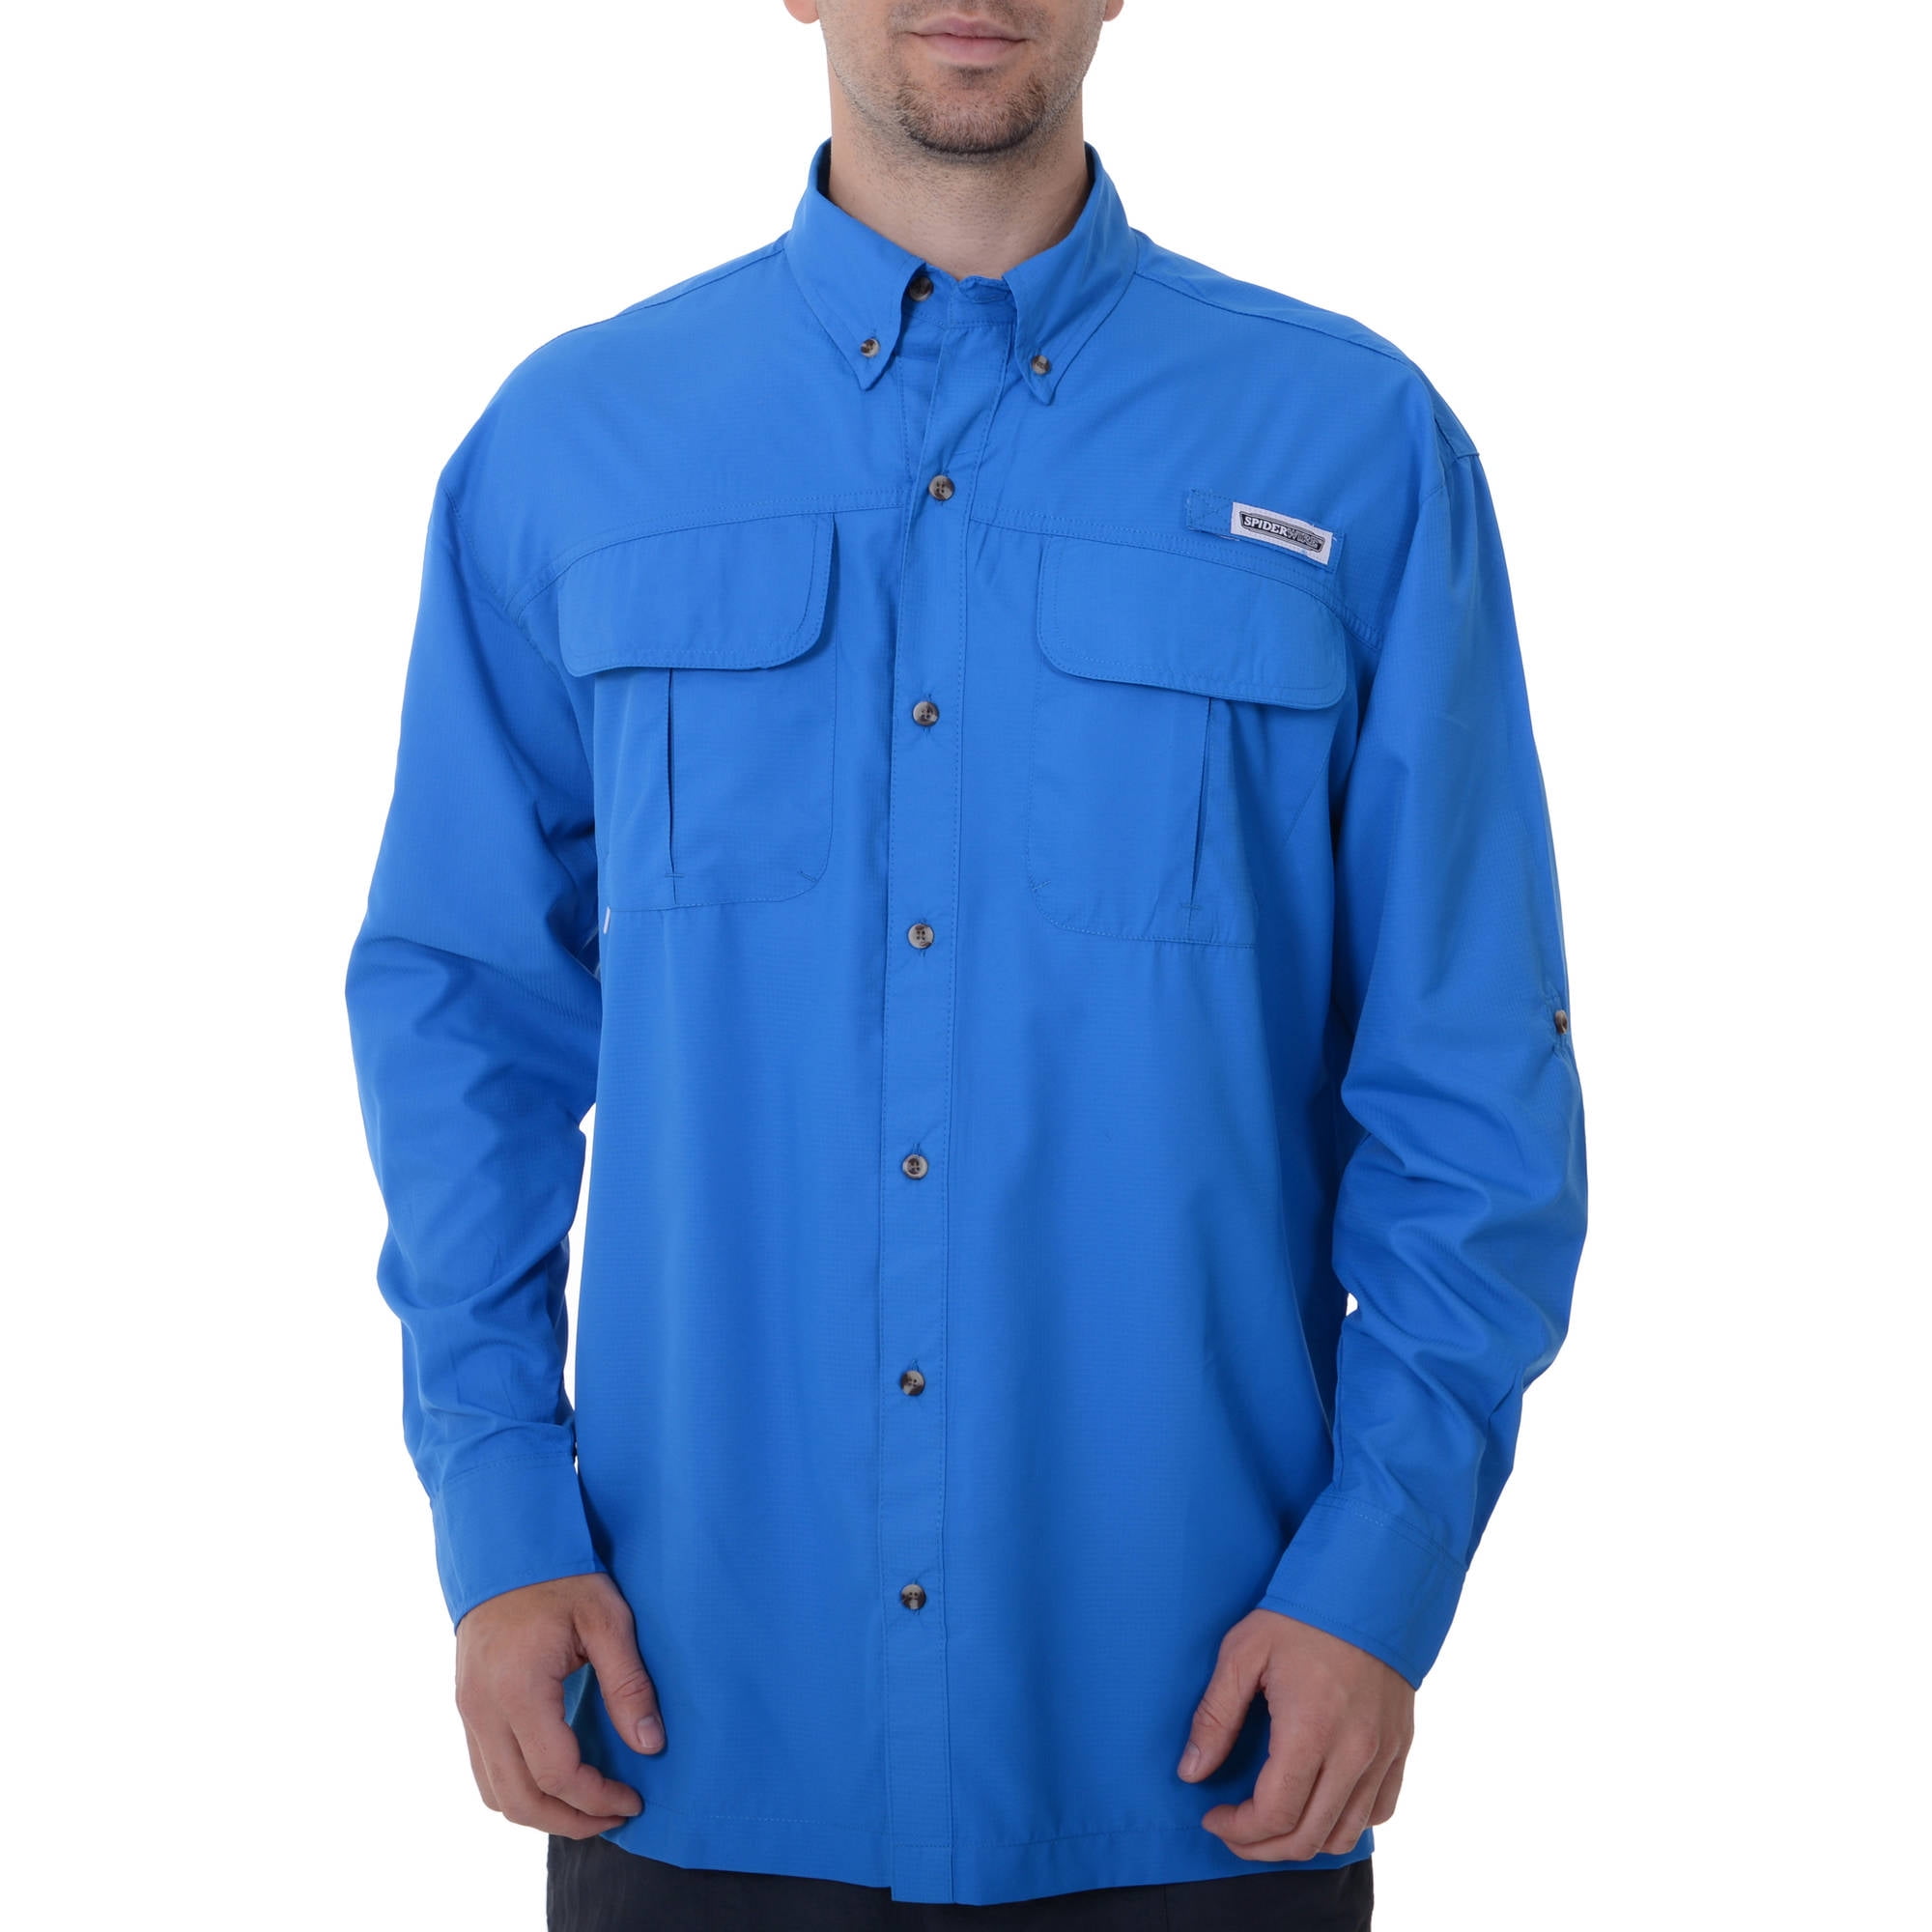 Spiderwire Fishing Guide Shirt 